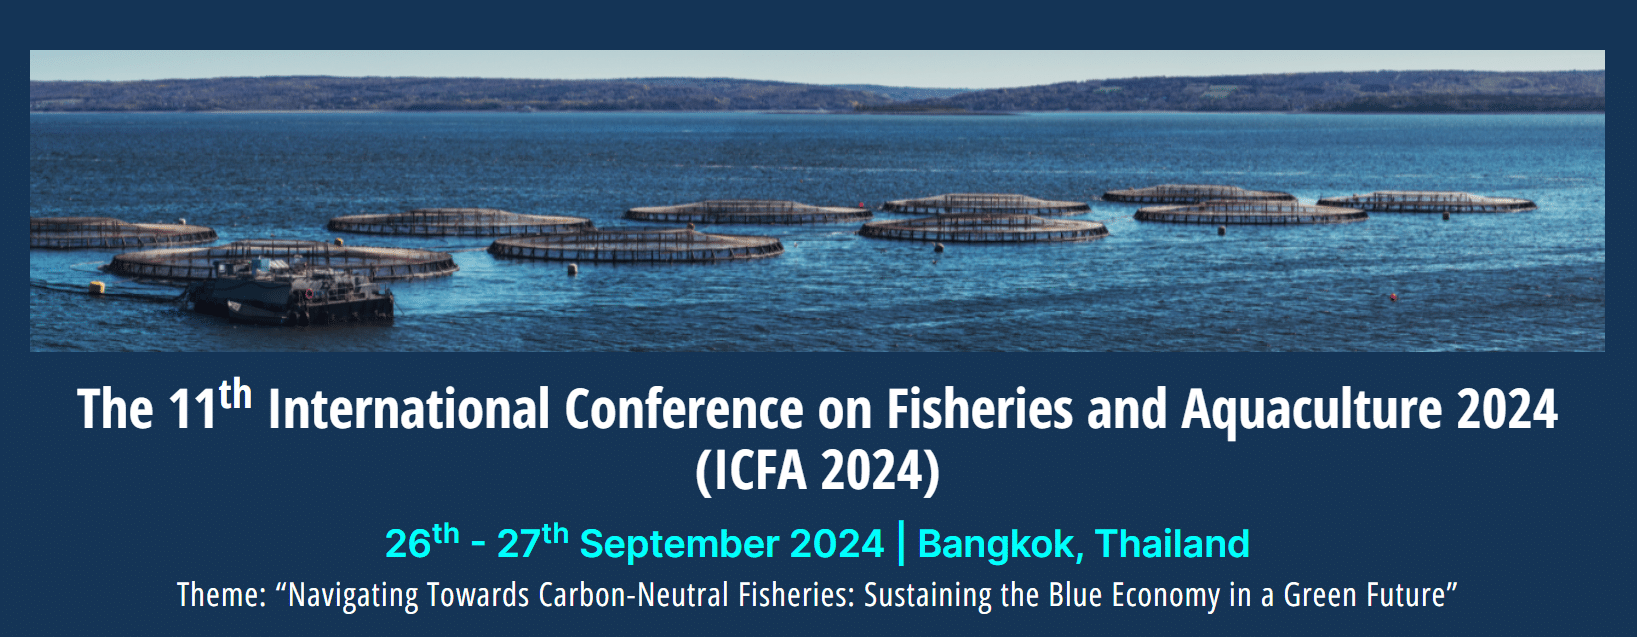 The 11th International Conference on Fisheries and Aquaculture 2024 (ICFA 2024)